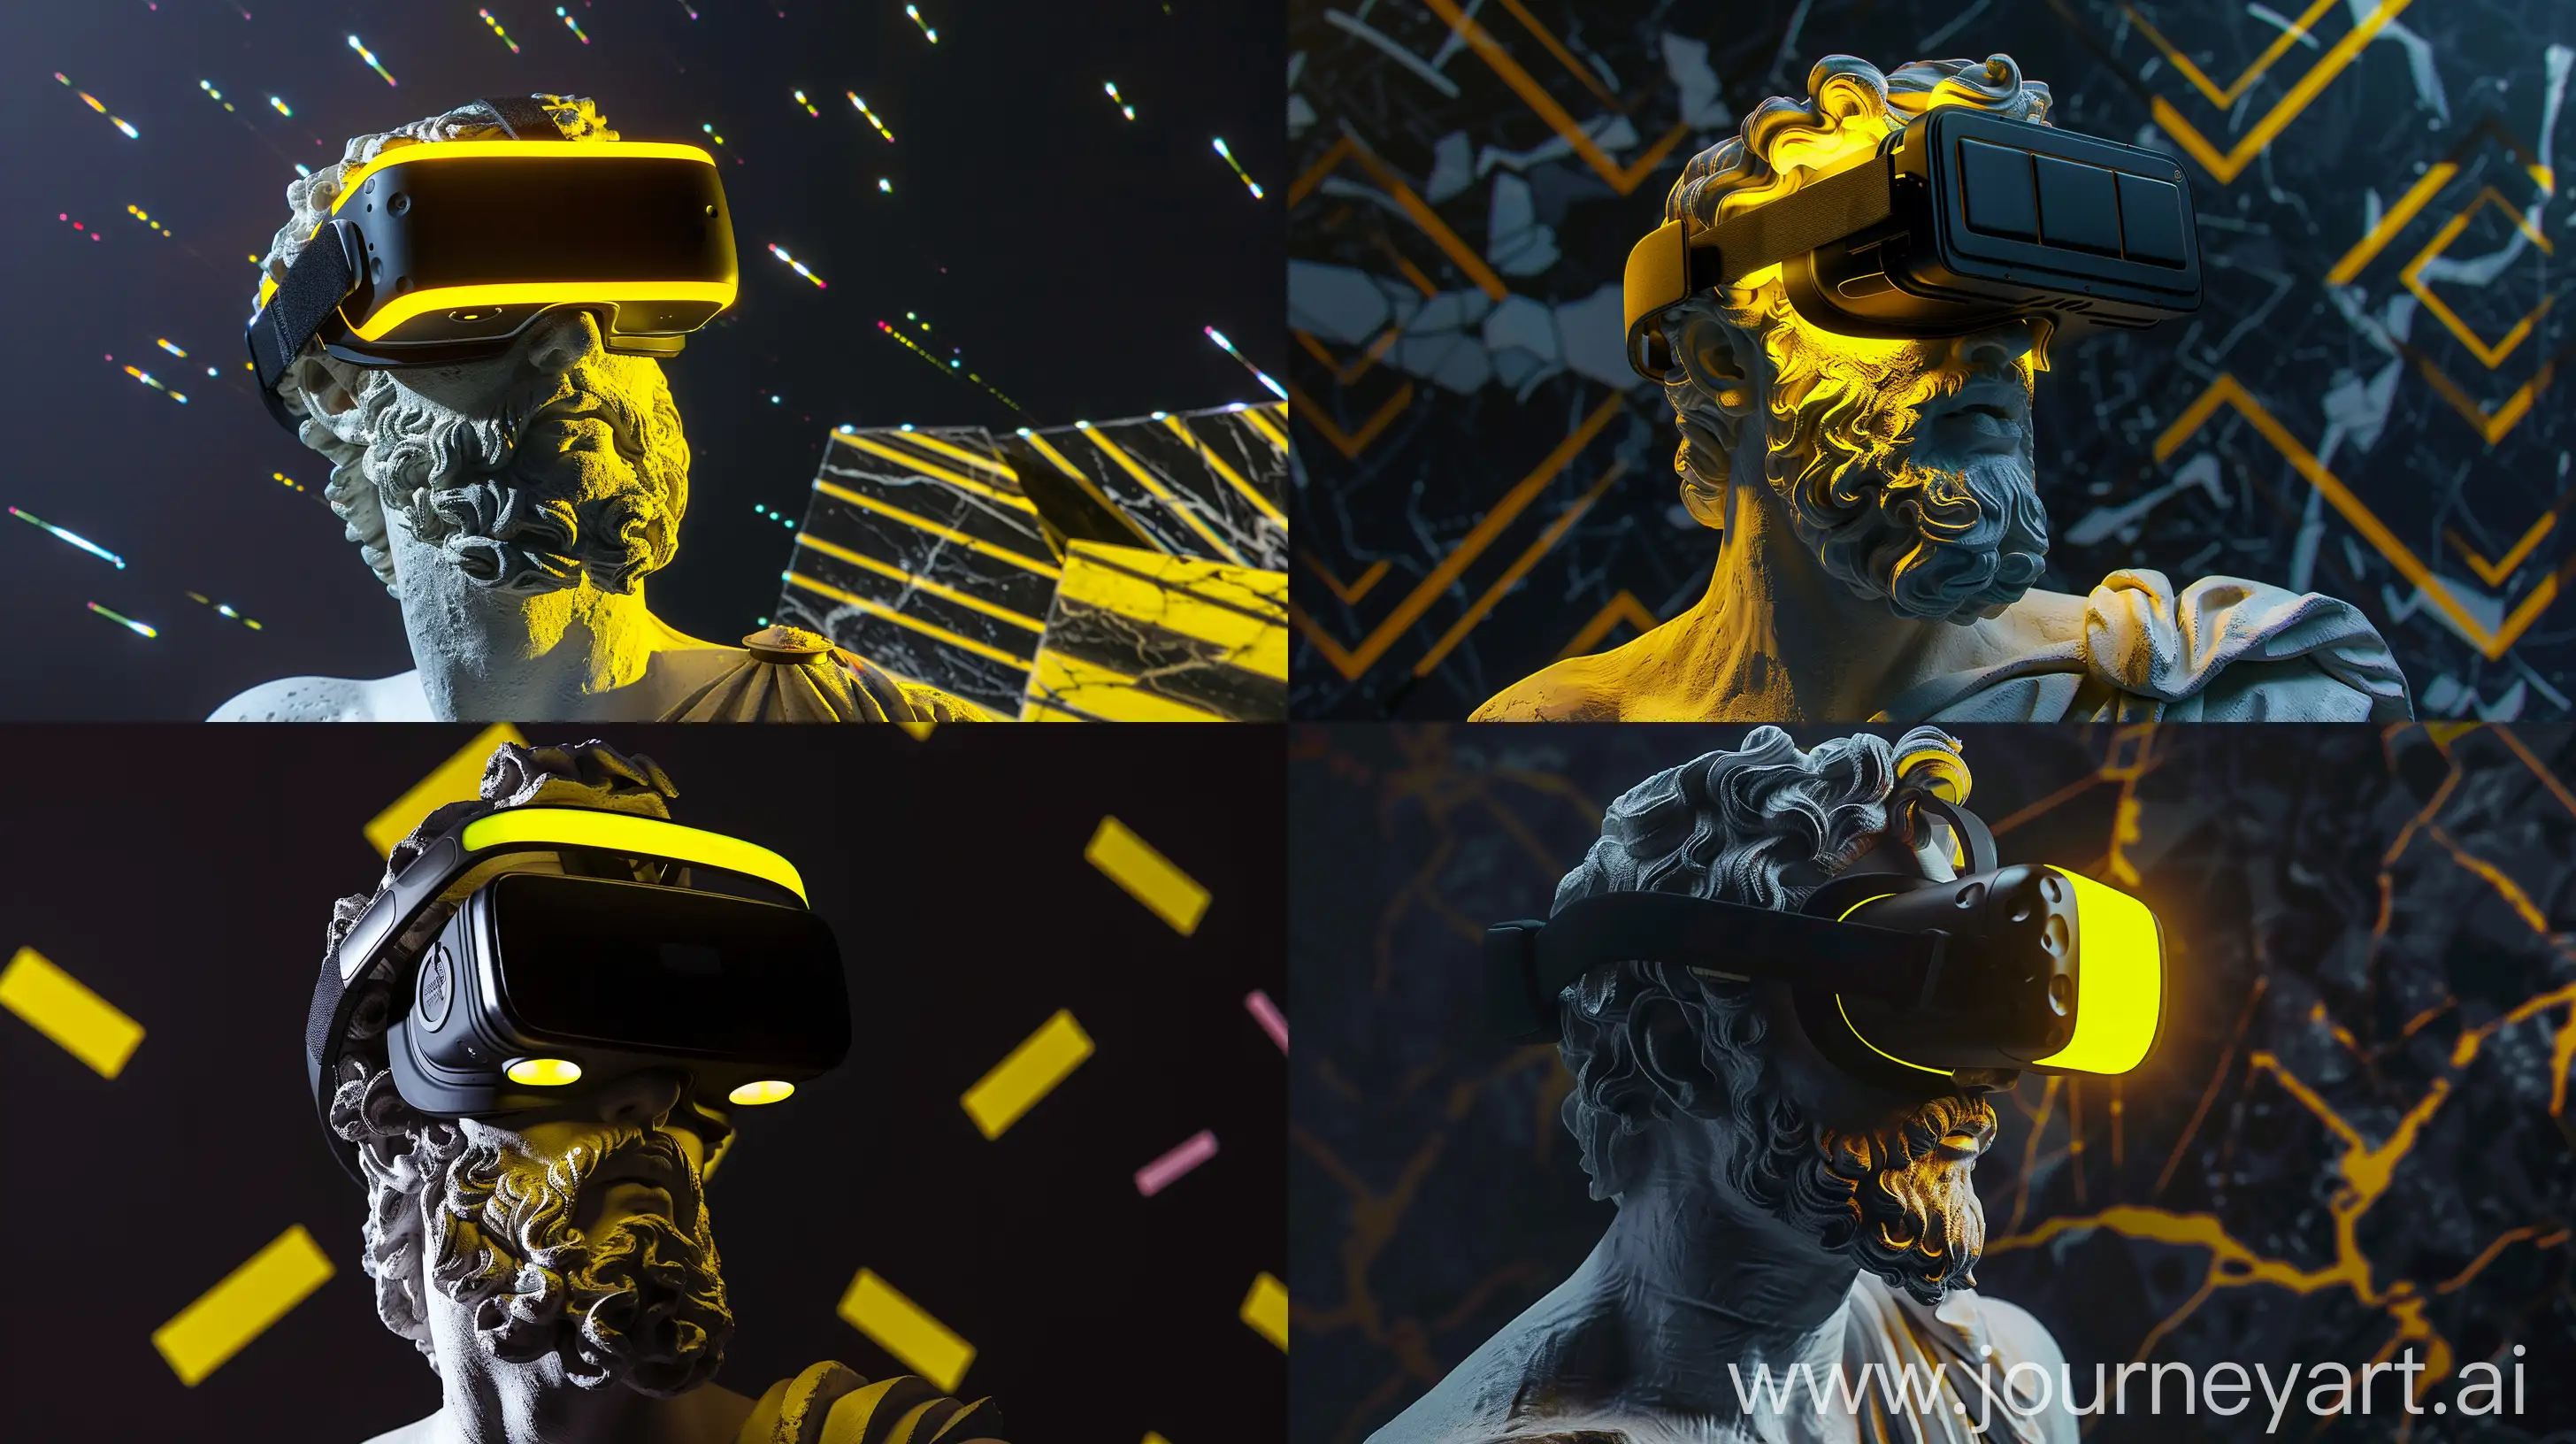 Modern-Zeus-Sculpture-with-Yellow-LED-VR-Glasses-in-Abstract-Setting